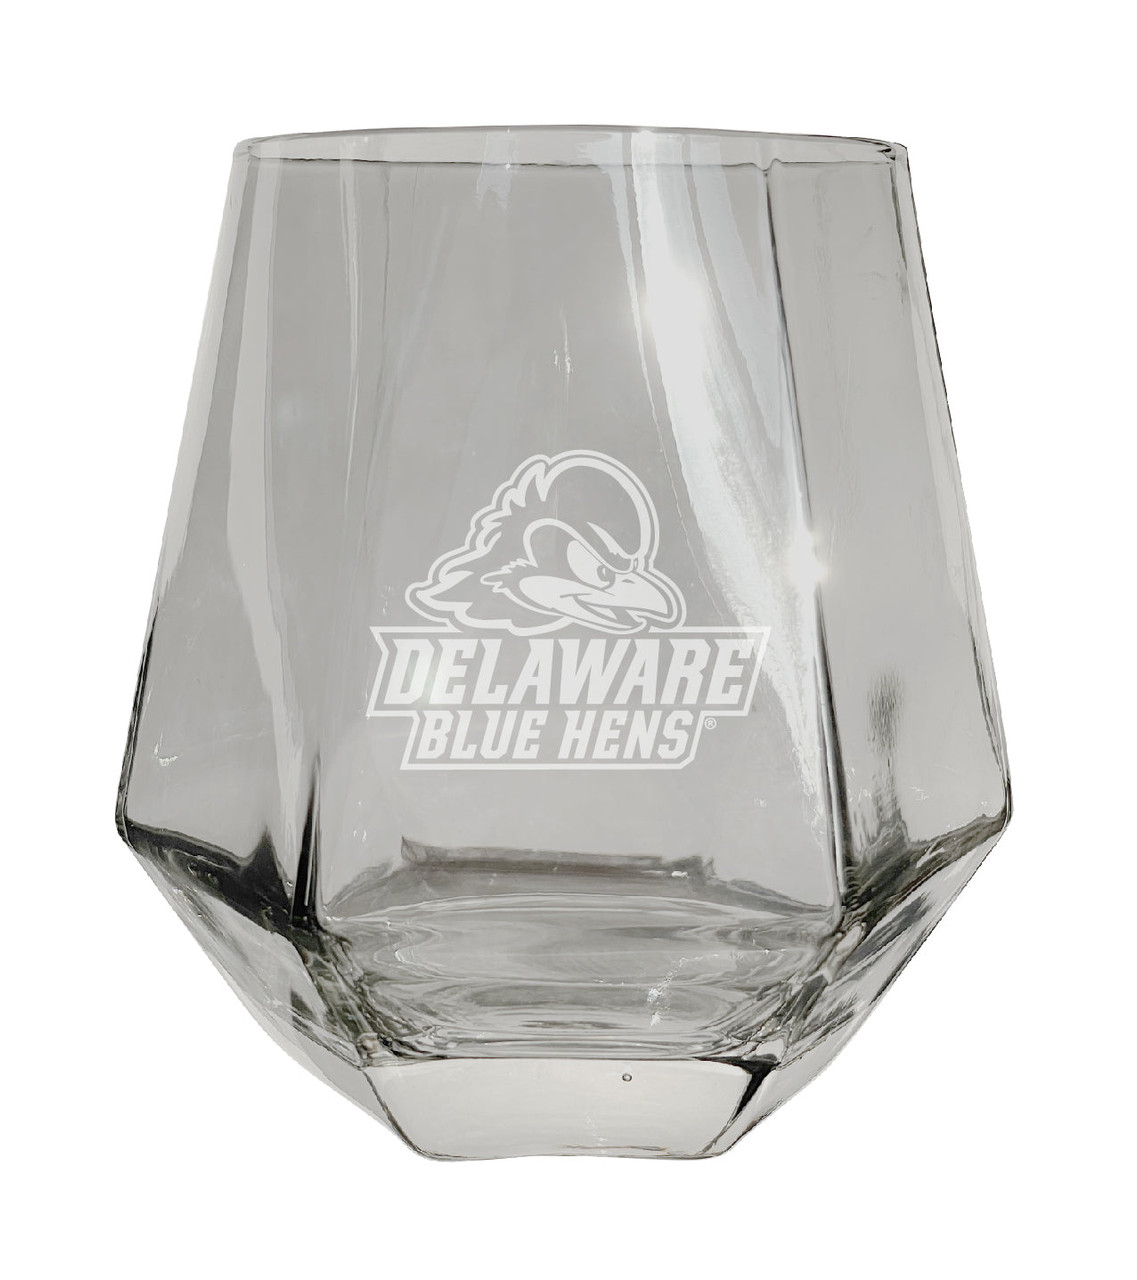 Delaware Blue Hens Etched Diamond Cut Stemless 10 ounce Wine Glass Clear